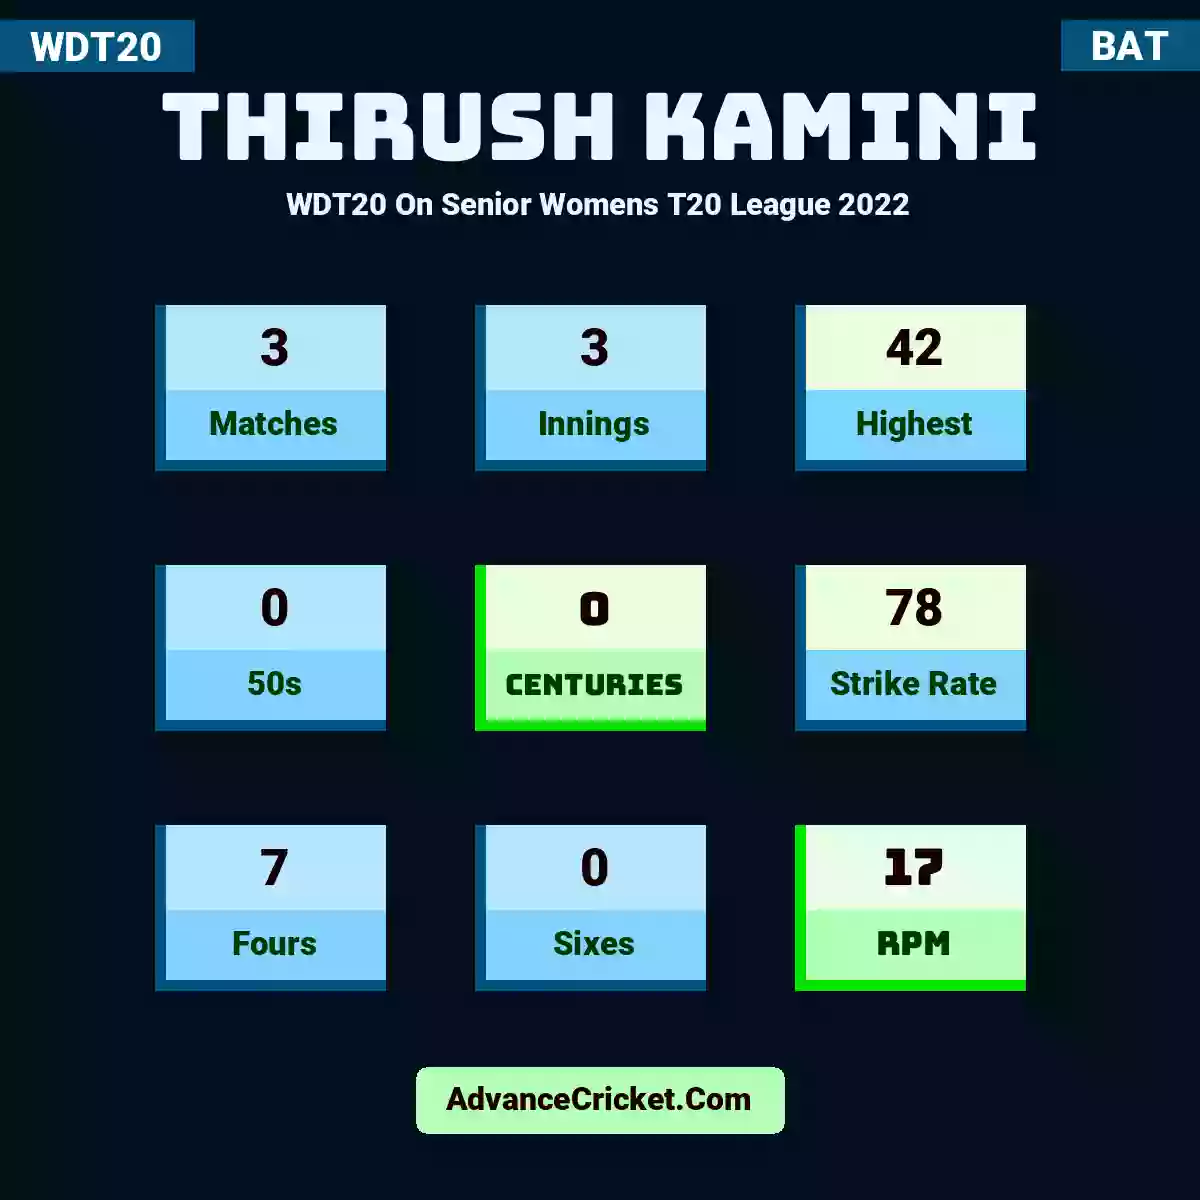 Thirush Kamini WDT20  On Senior Womens T20 League 2022, Thirush Kamini played 3 matches, scored 42 runs as highest, 0 half-centuries, and 0 centuries, with a strike rate of 78. T.Kamini hit 7 fours and 0 sixes, with an RPM of 17.